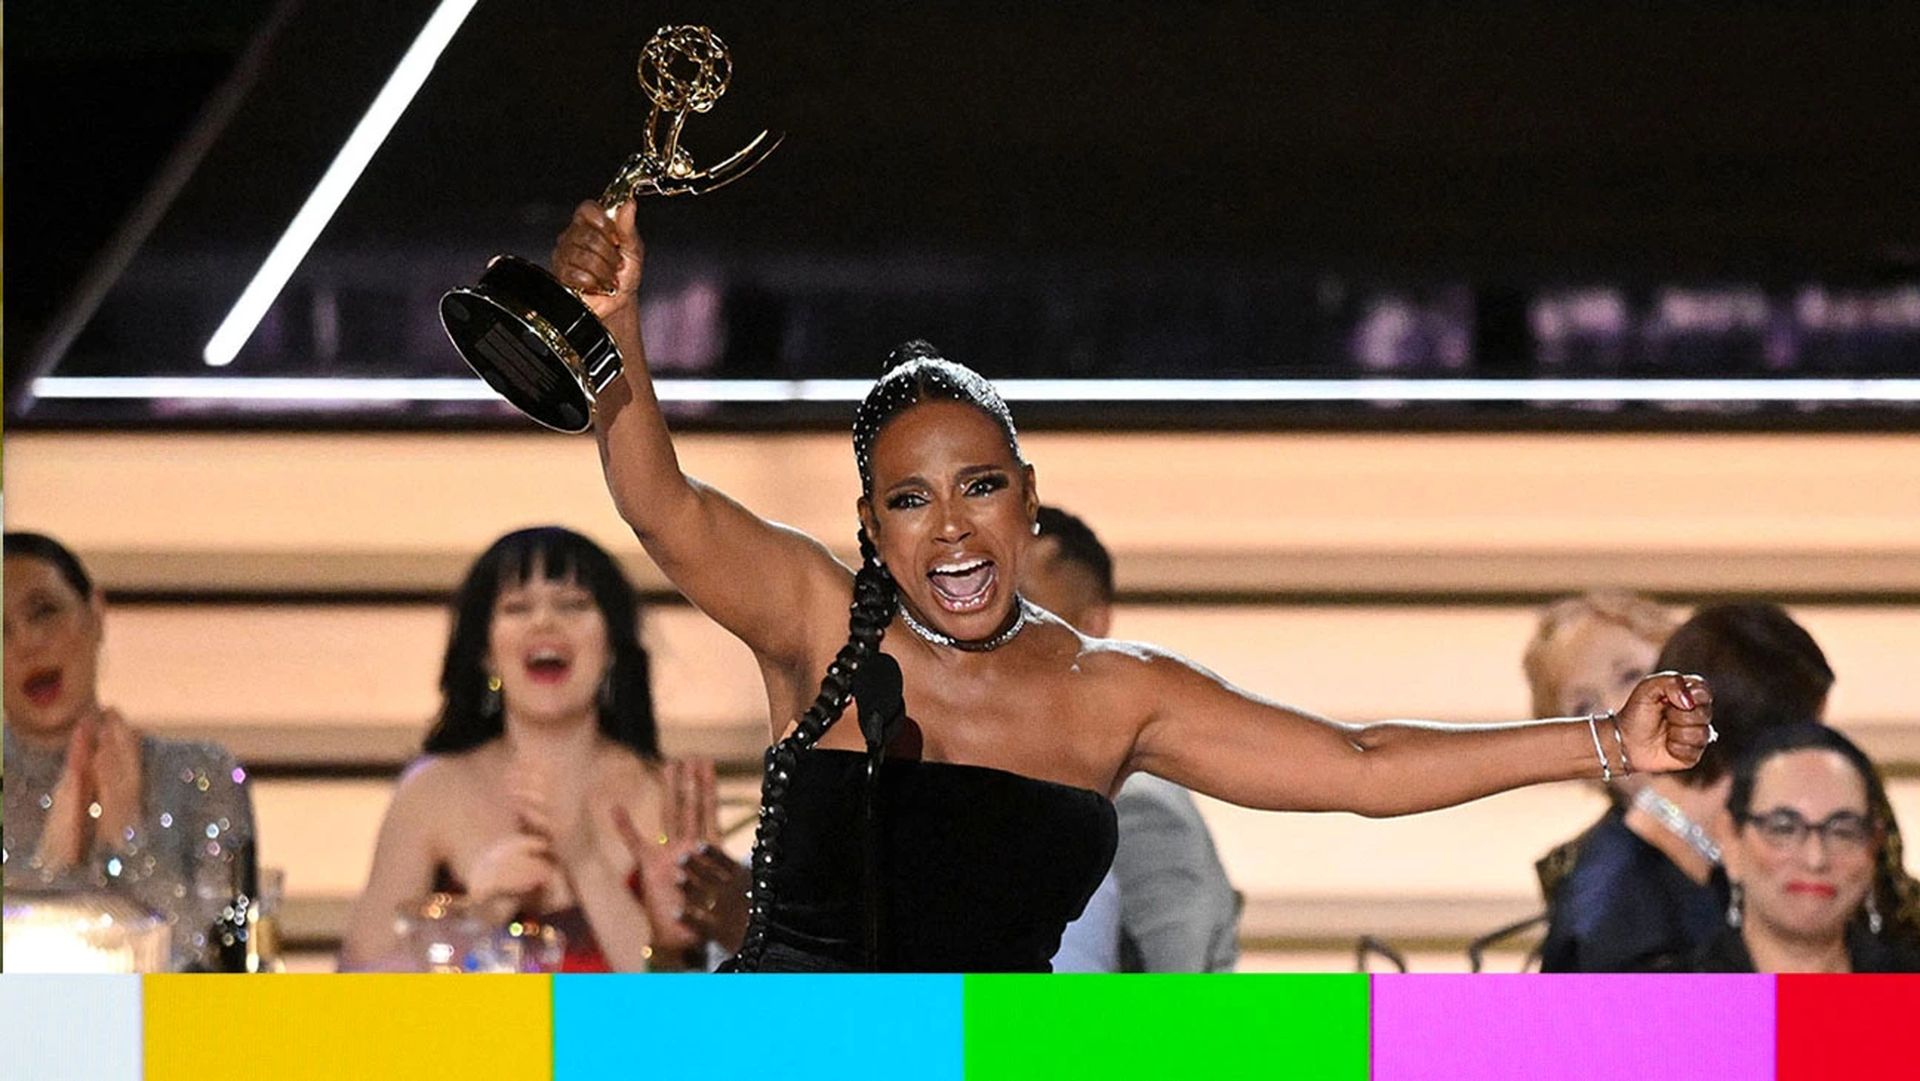 In this article, we are going to be covering the list of Emmy Awards 2022 nominees and winners, so you know if your favorite shows picked up an award or not.